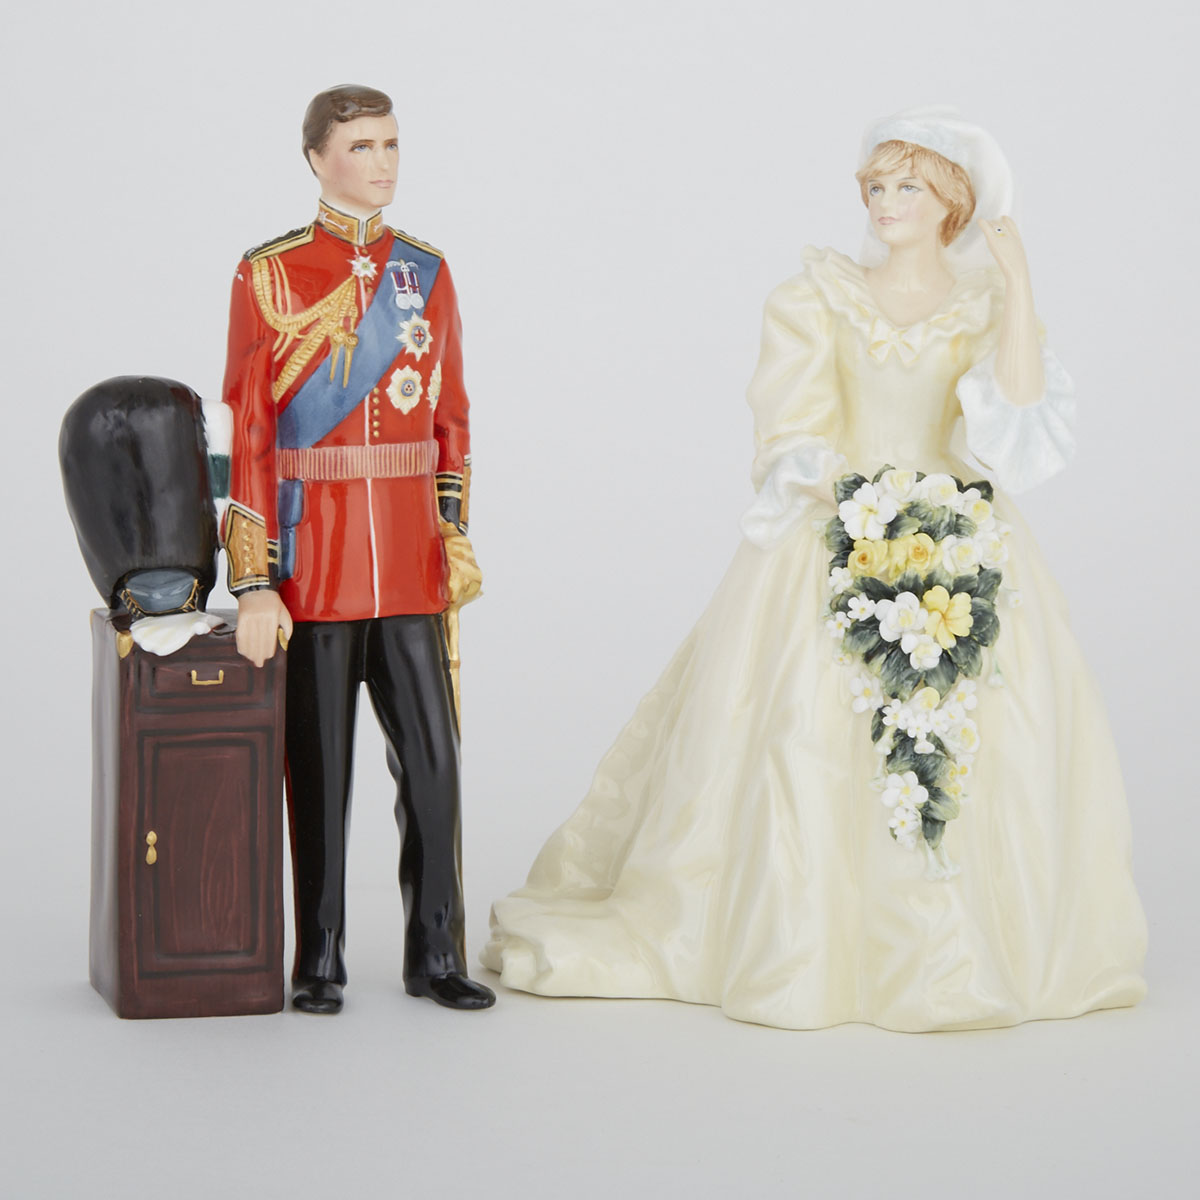 Two Royal Doulton Portrait Figures of H.R.H. The Prince and Princess of Wales, c.1981